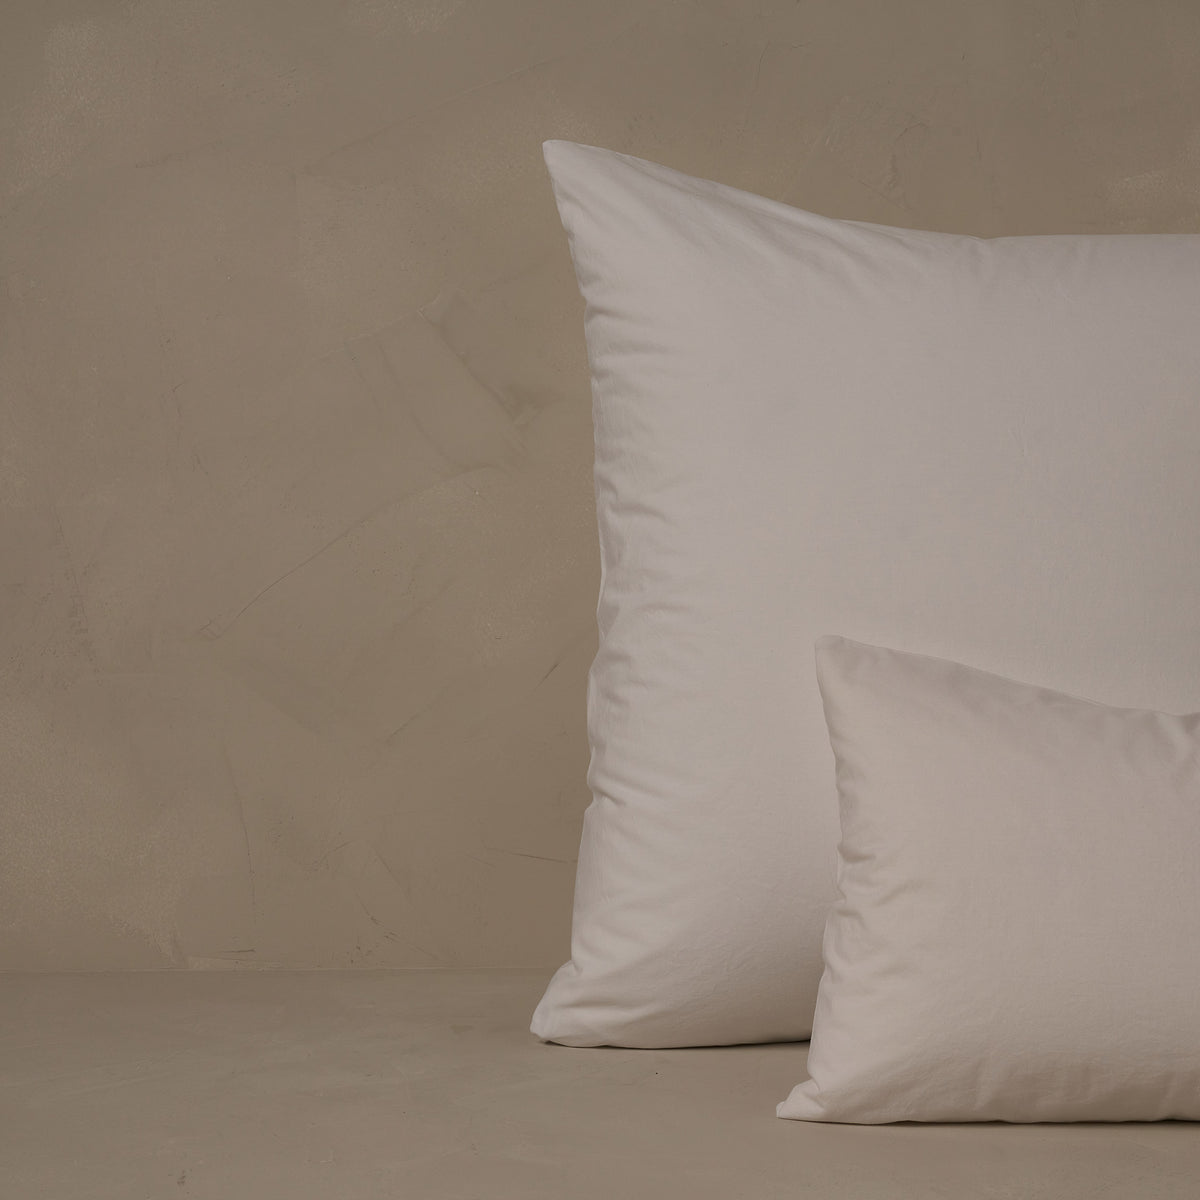 An image of a small boudoir or travel size pillow stacked in front of a large euro size pillow. The pillow cases are made in Italy of crisp and cool LETTO 100% Organico Cotton Percale in color white. data-image-id=